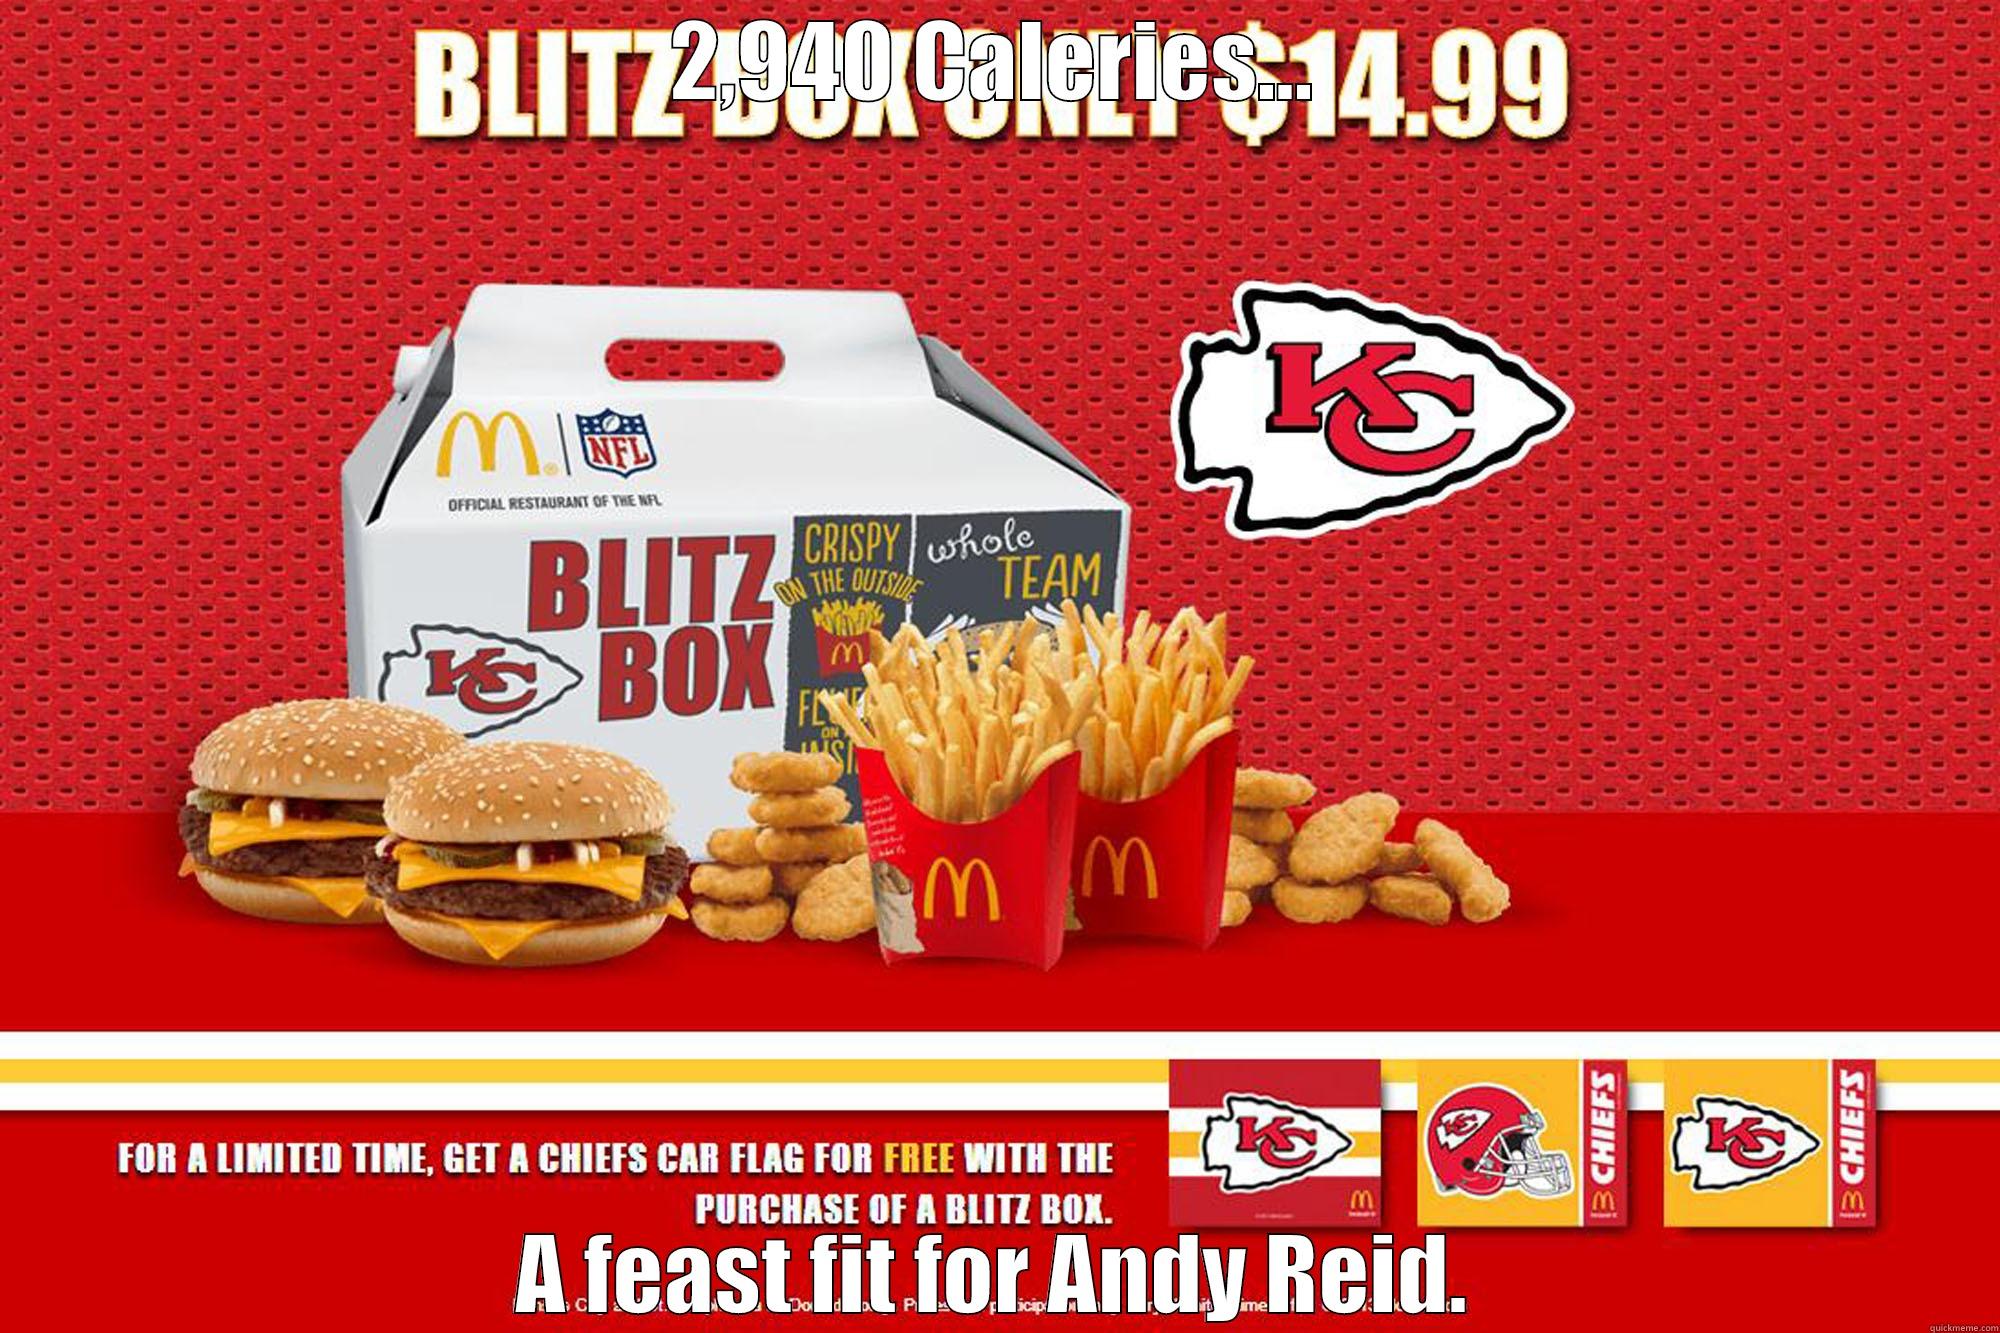 2,940 CALERIES... A FEAST FIT FOR ANDY REID. Misc